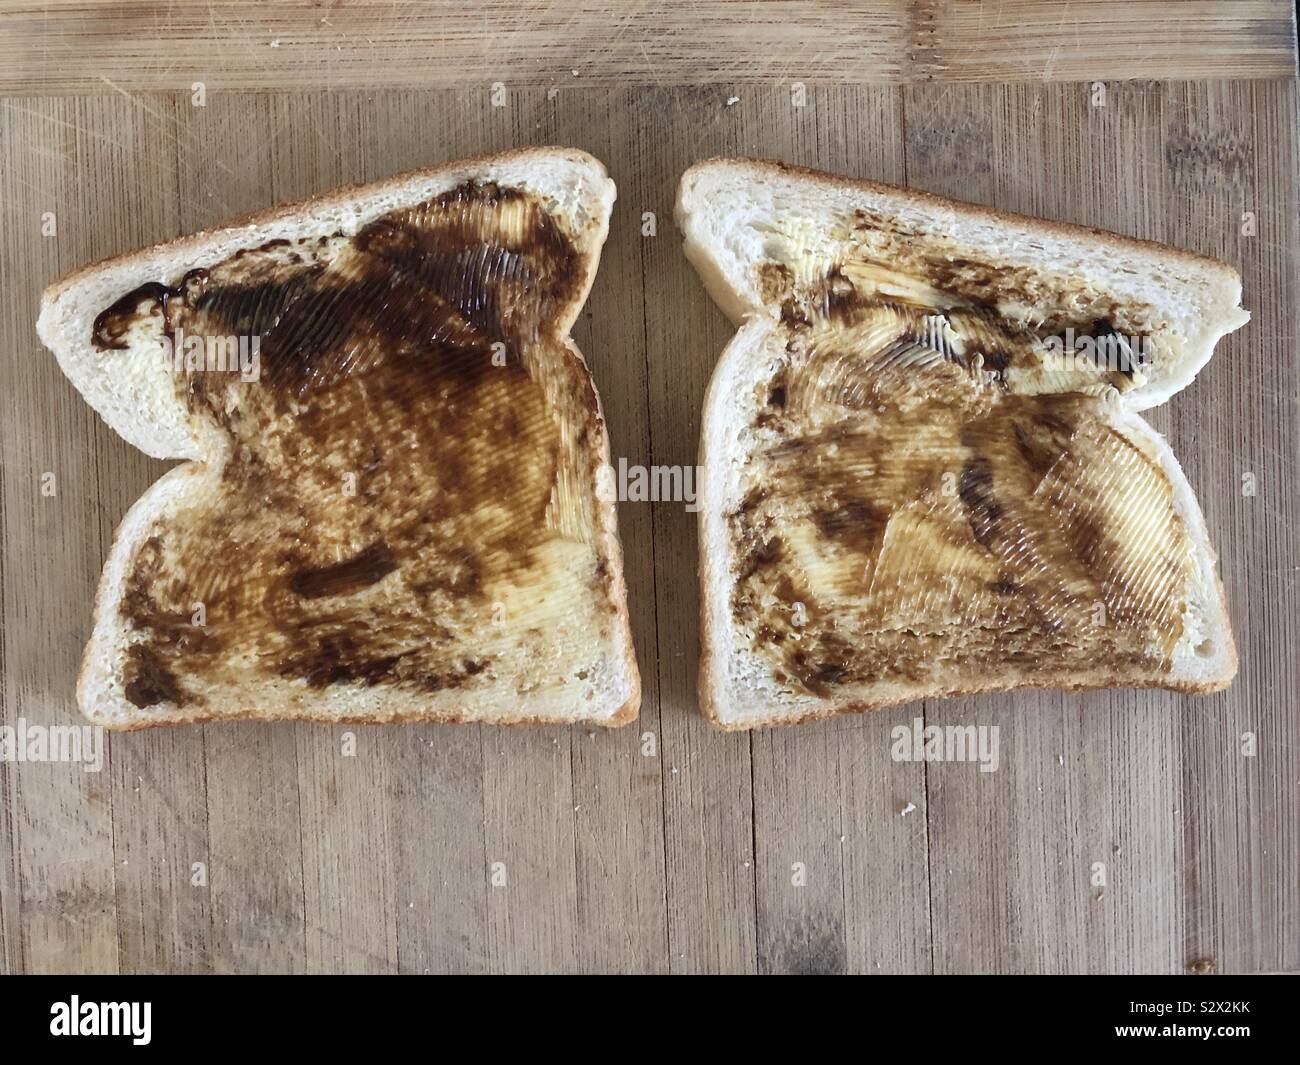 and butter on white bread is a typical Australian Photo Alamy